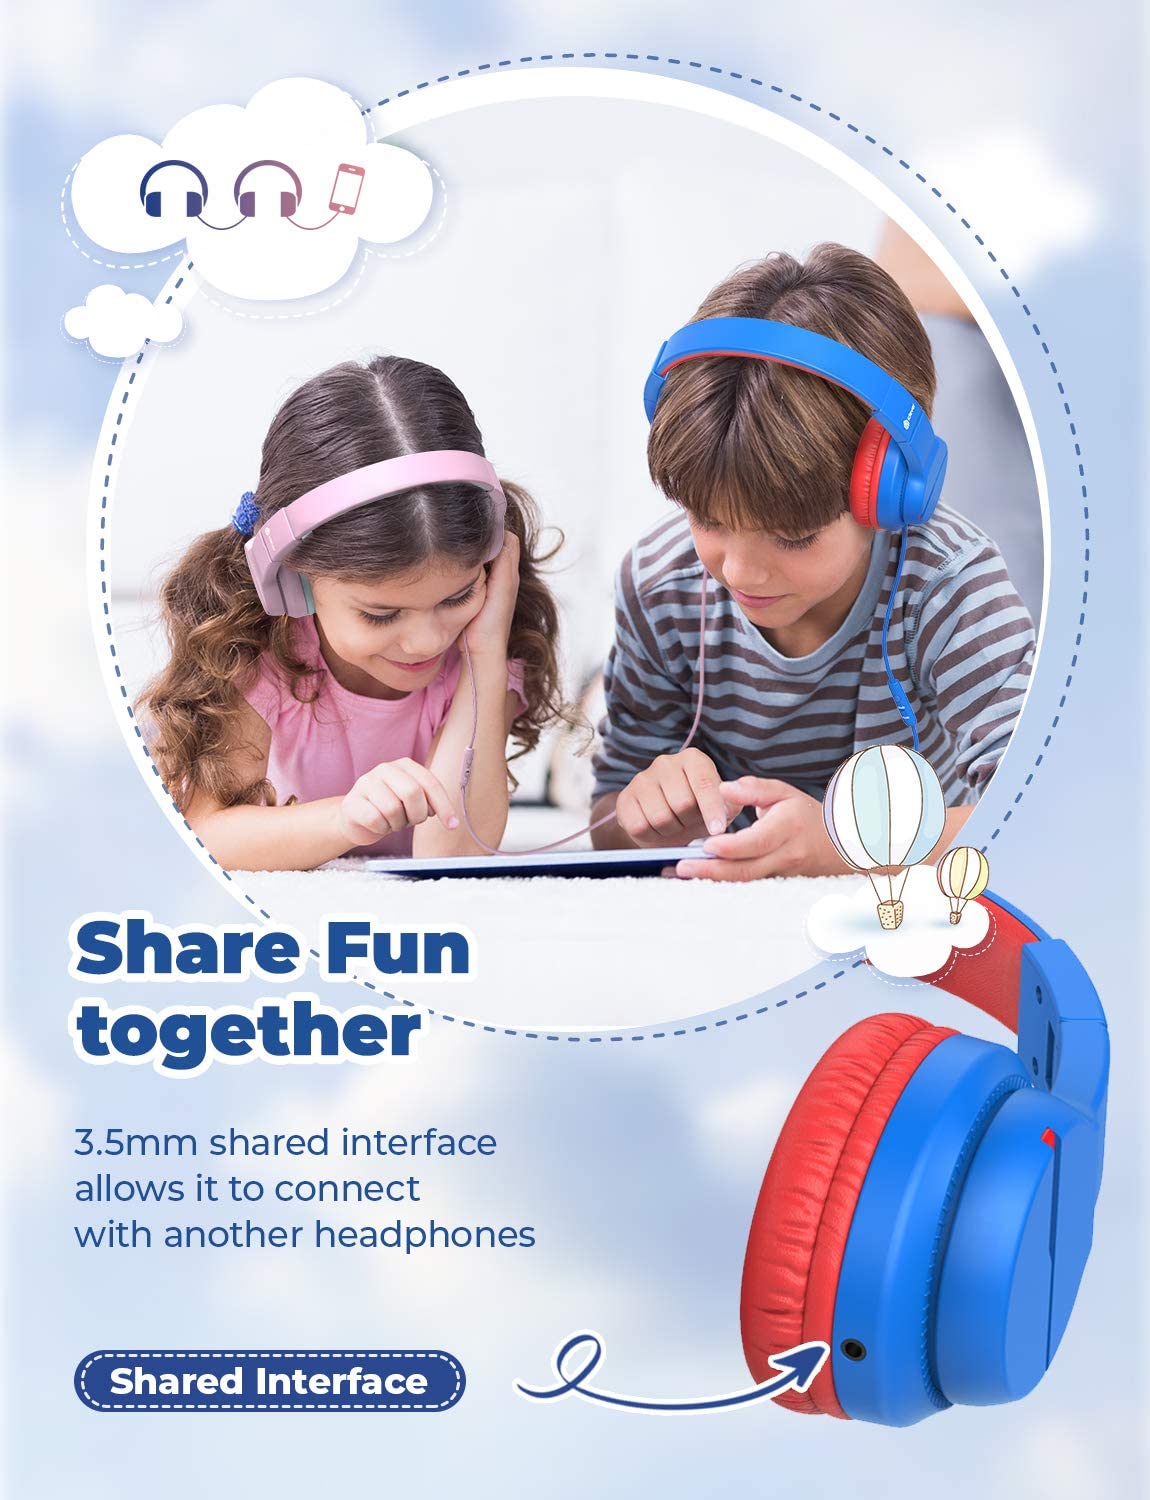 iClever HS19 Kids Headphones with Microphone for School, Volume Limiter 85/94dB, Over-Ear Girls Boys Headphones for Kids with Shareport, Foldable Wired Headphones for iPad/Fire Tablet/Travel.